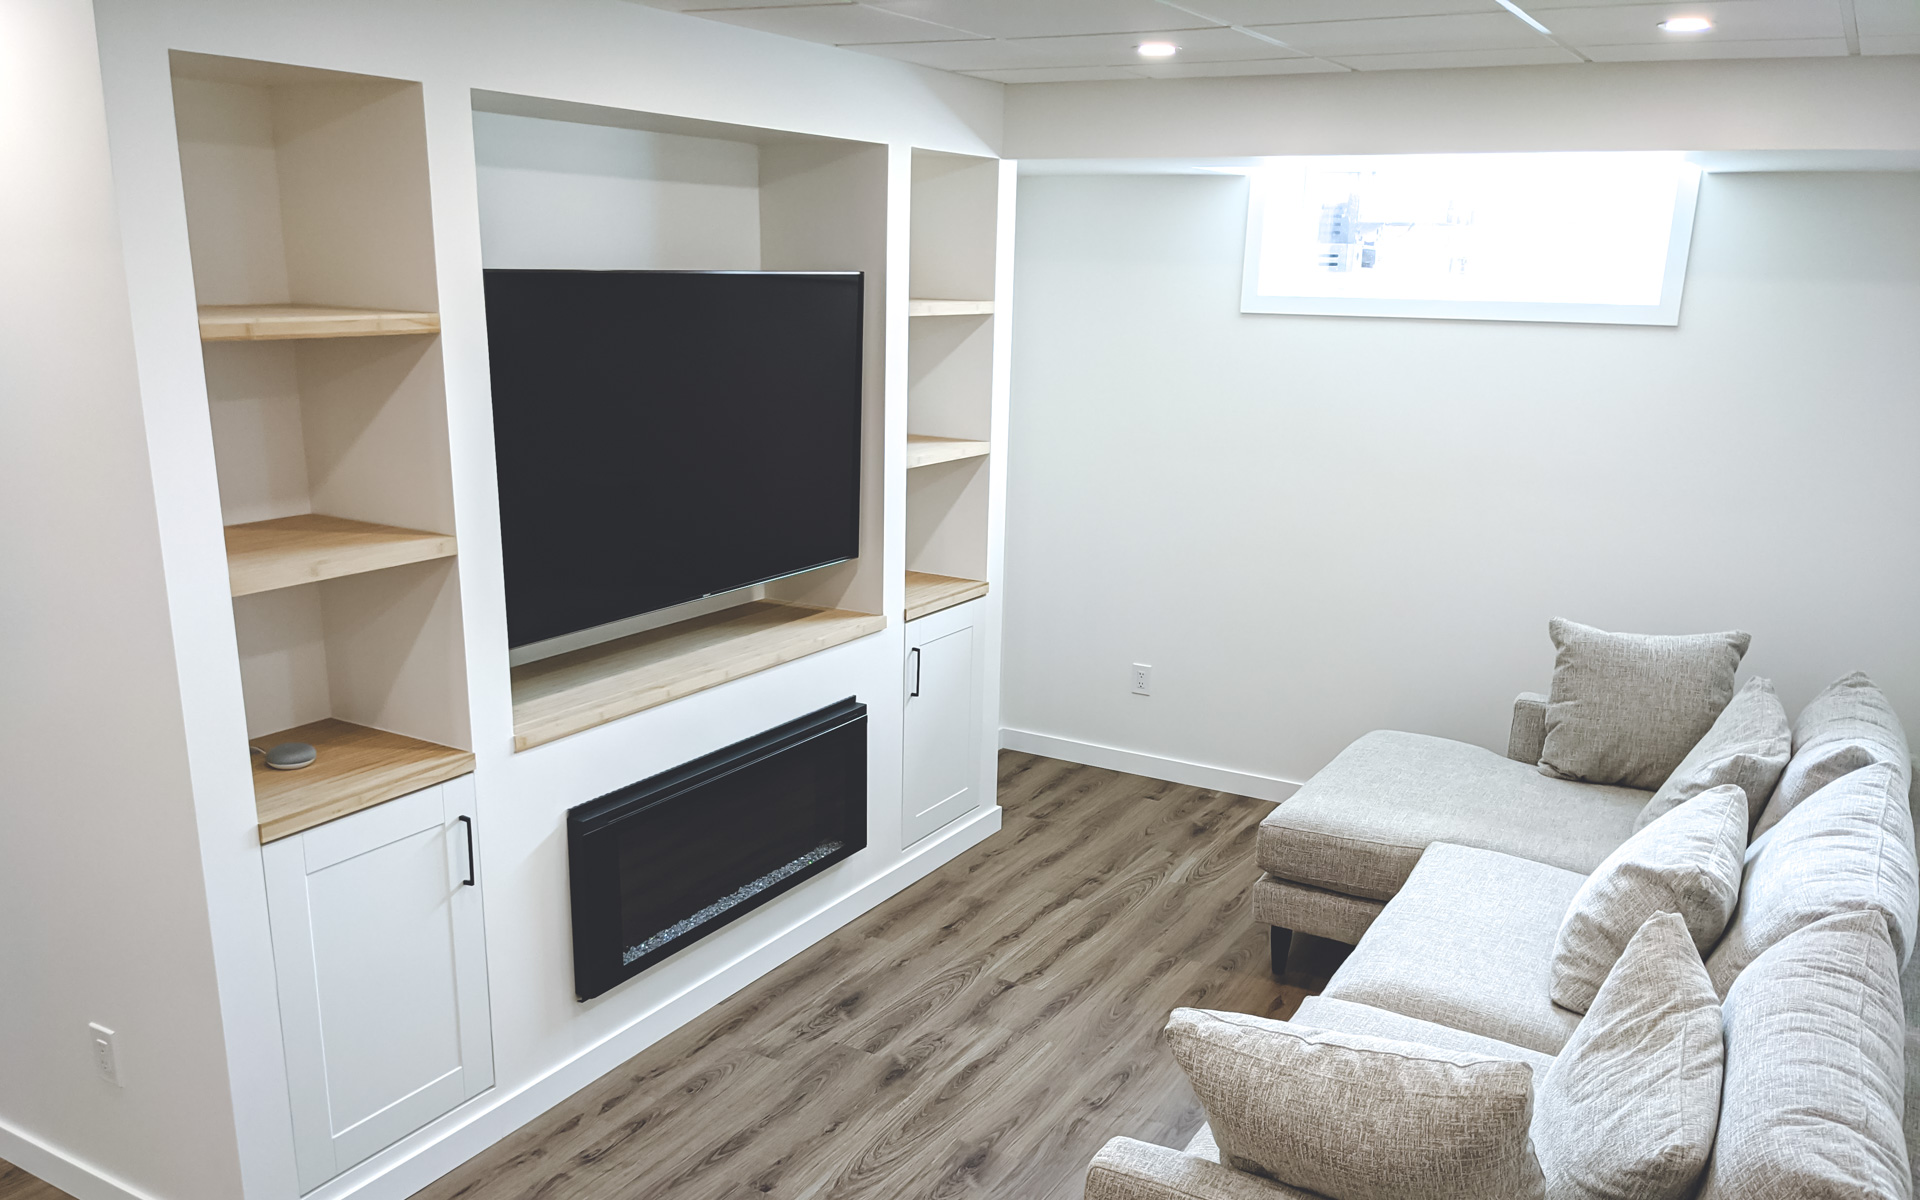 A custom built-in TV unit and recently installed laminate flooring by BZ Carpentry Services in Winnipeg.